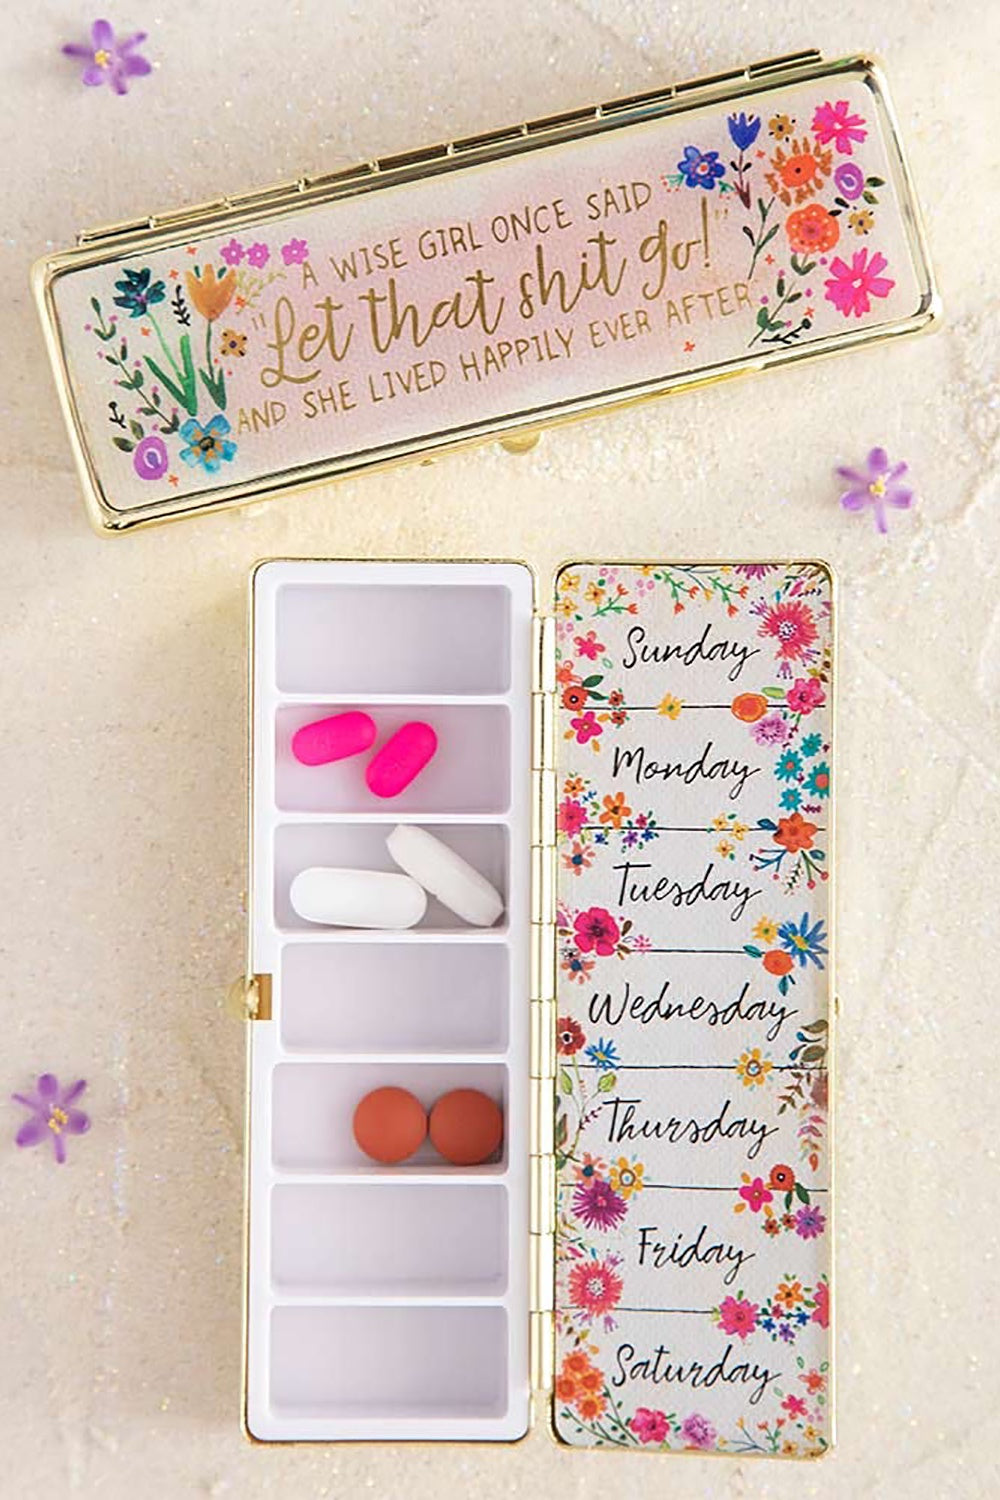 Wise Girl Daily Pill Box - Natural Life